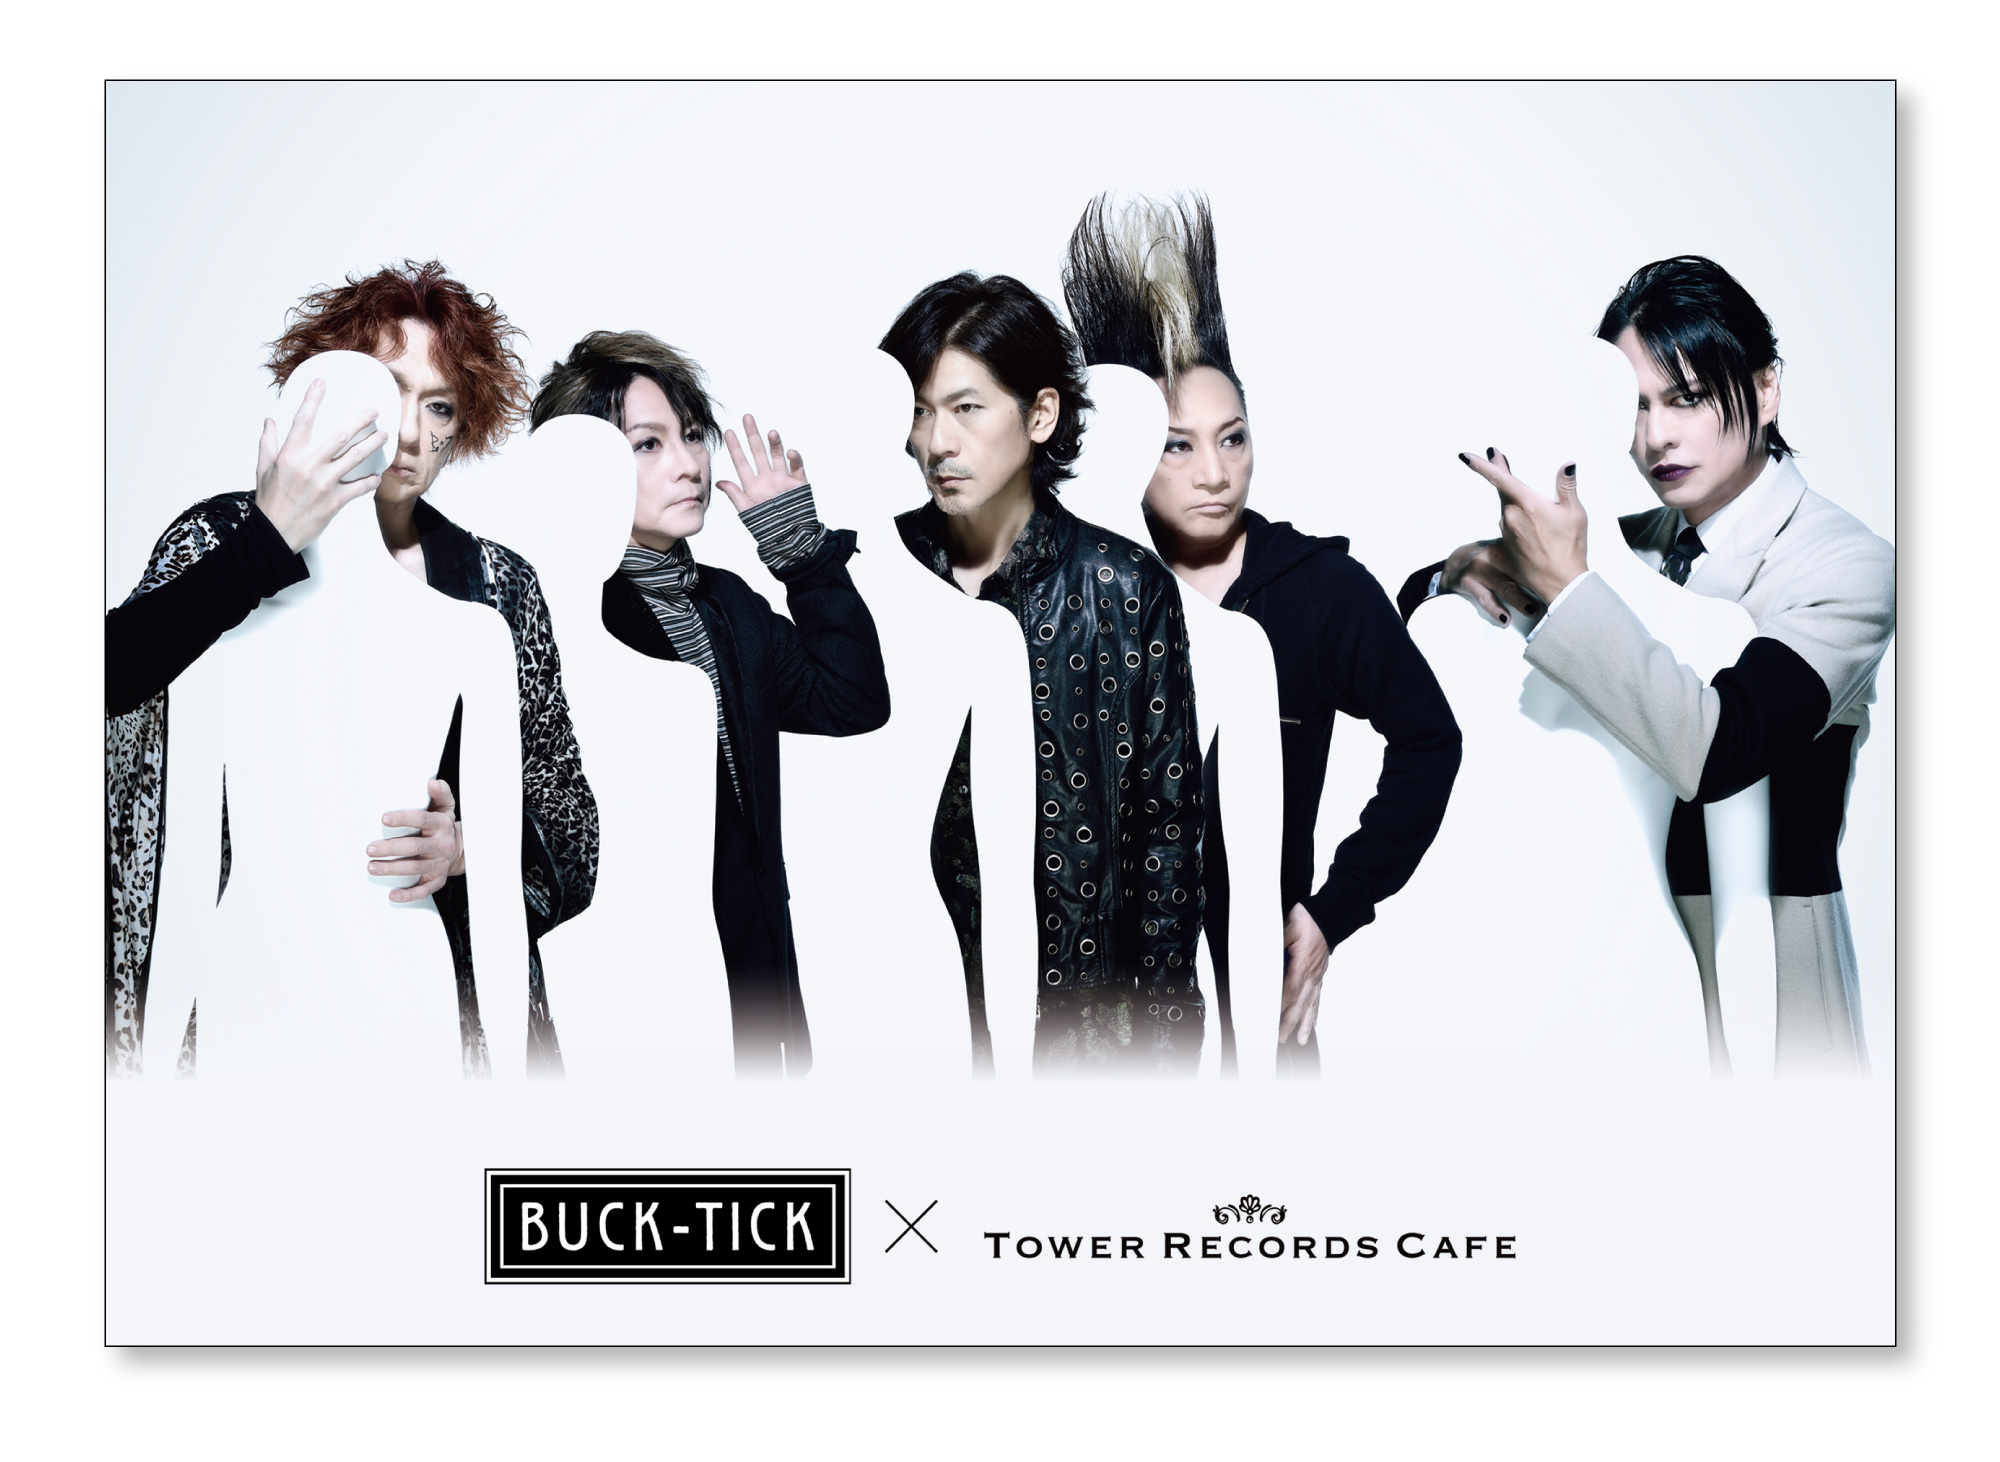 BUCK-TICK×TOWER RECORDS CAFE 2020年1月7日より開催決定